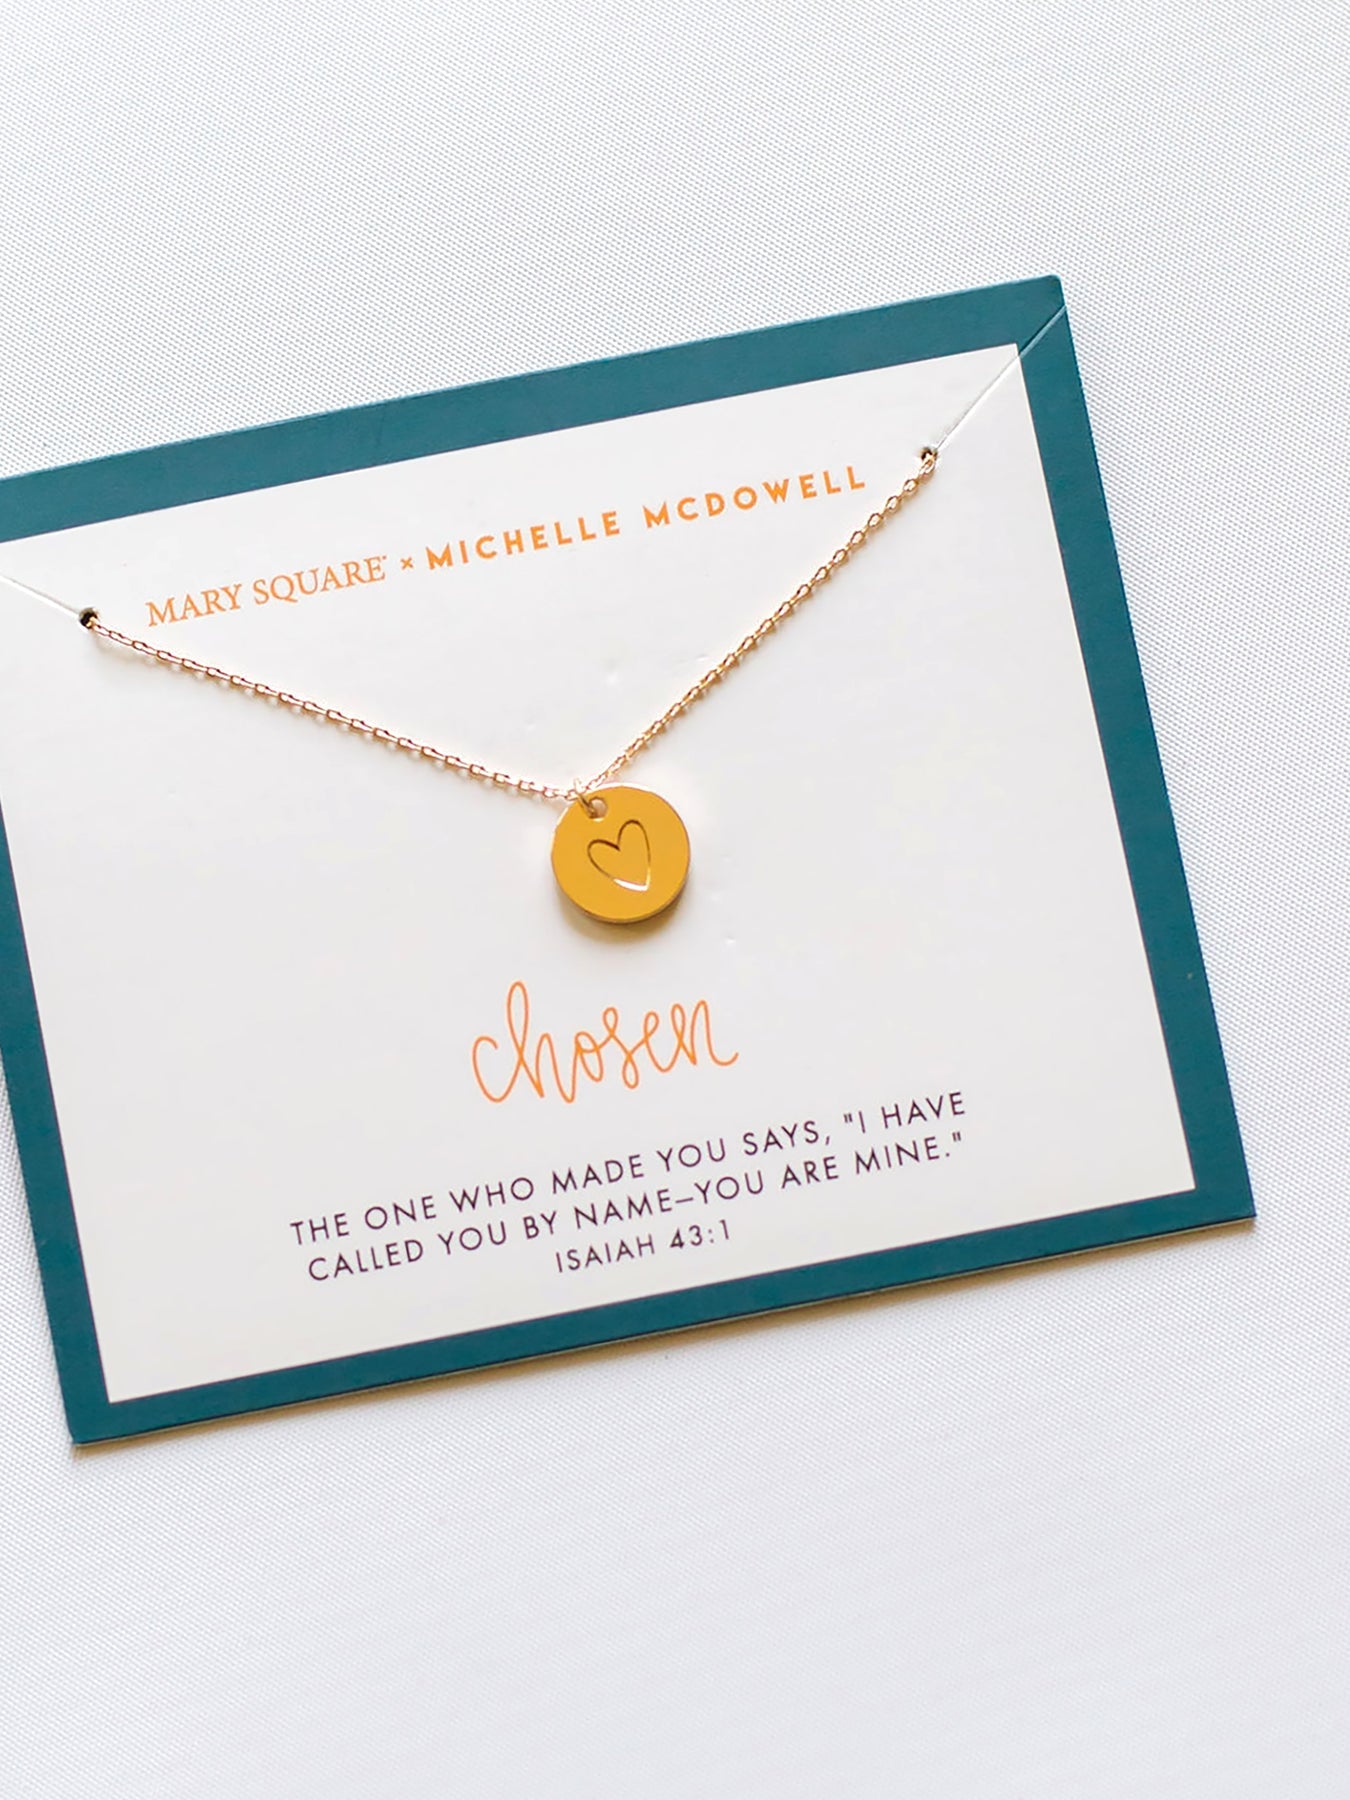 Mary Square x Michelle McDowell Inspirational Necklace